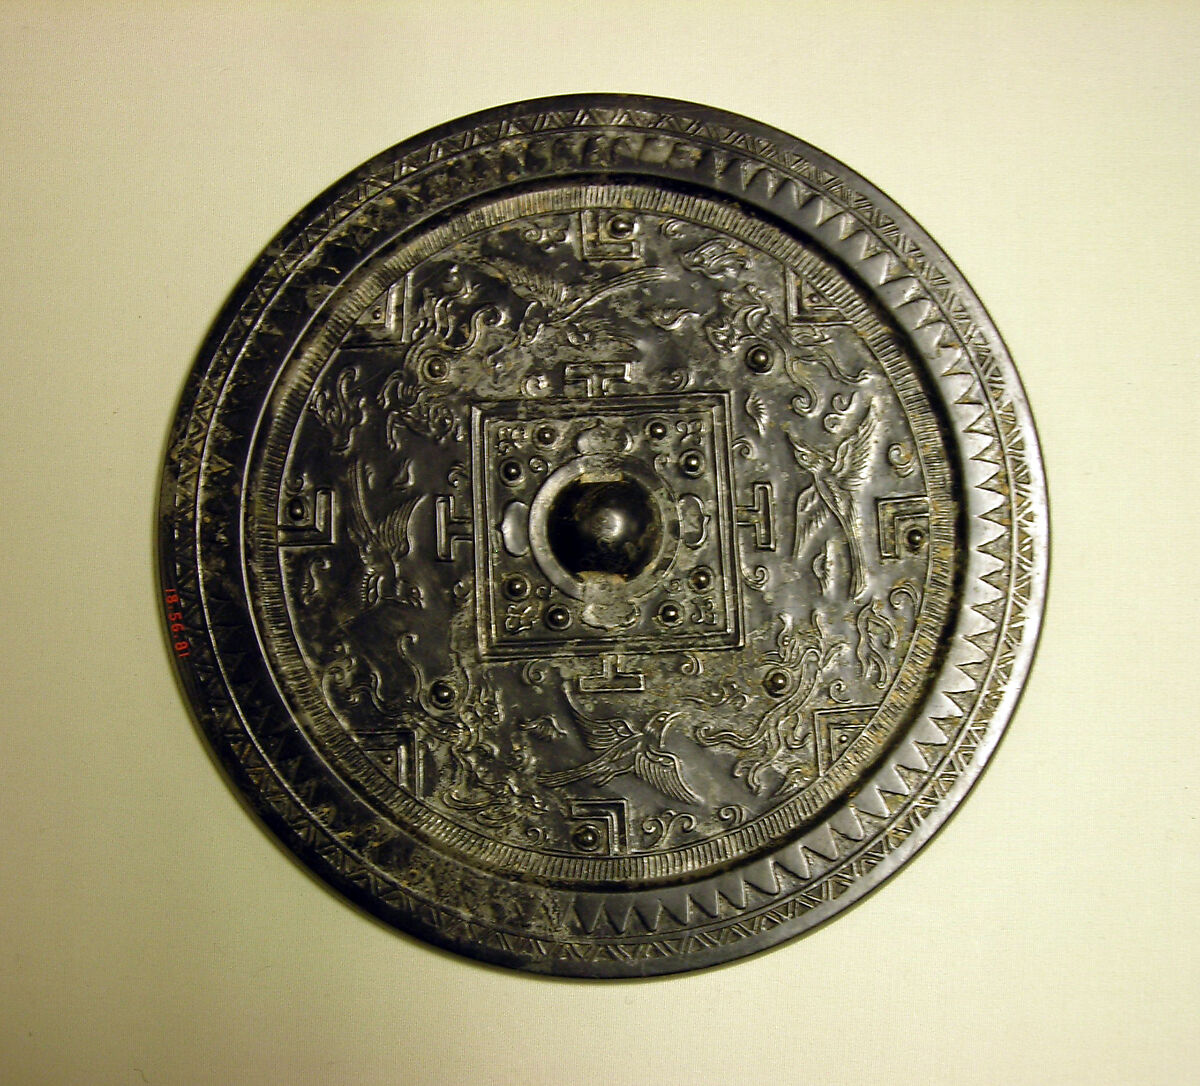 Mirror with board game design and mythical creatures, Bronze with black patina, China 